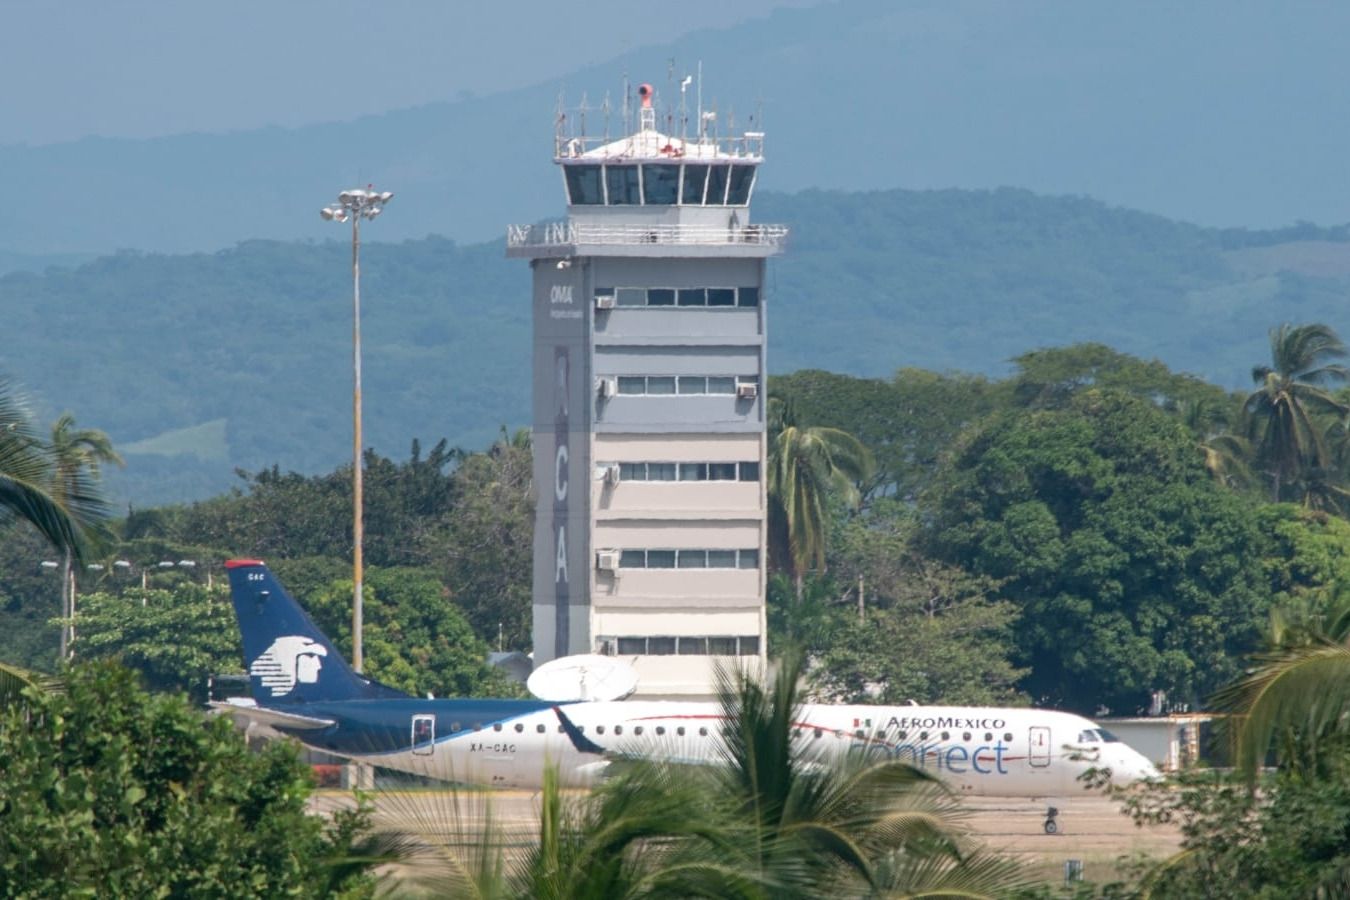 A view of Acapulco International Airport and an Aeromexico aircraft in the front. 